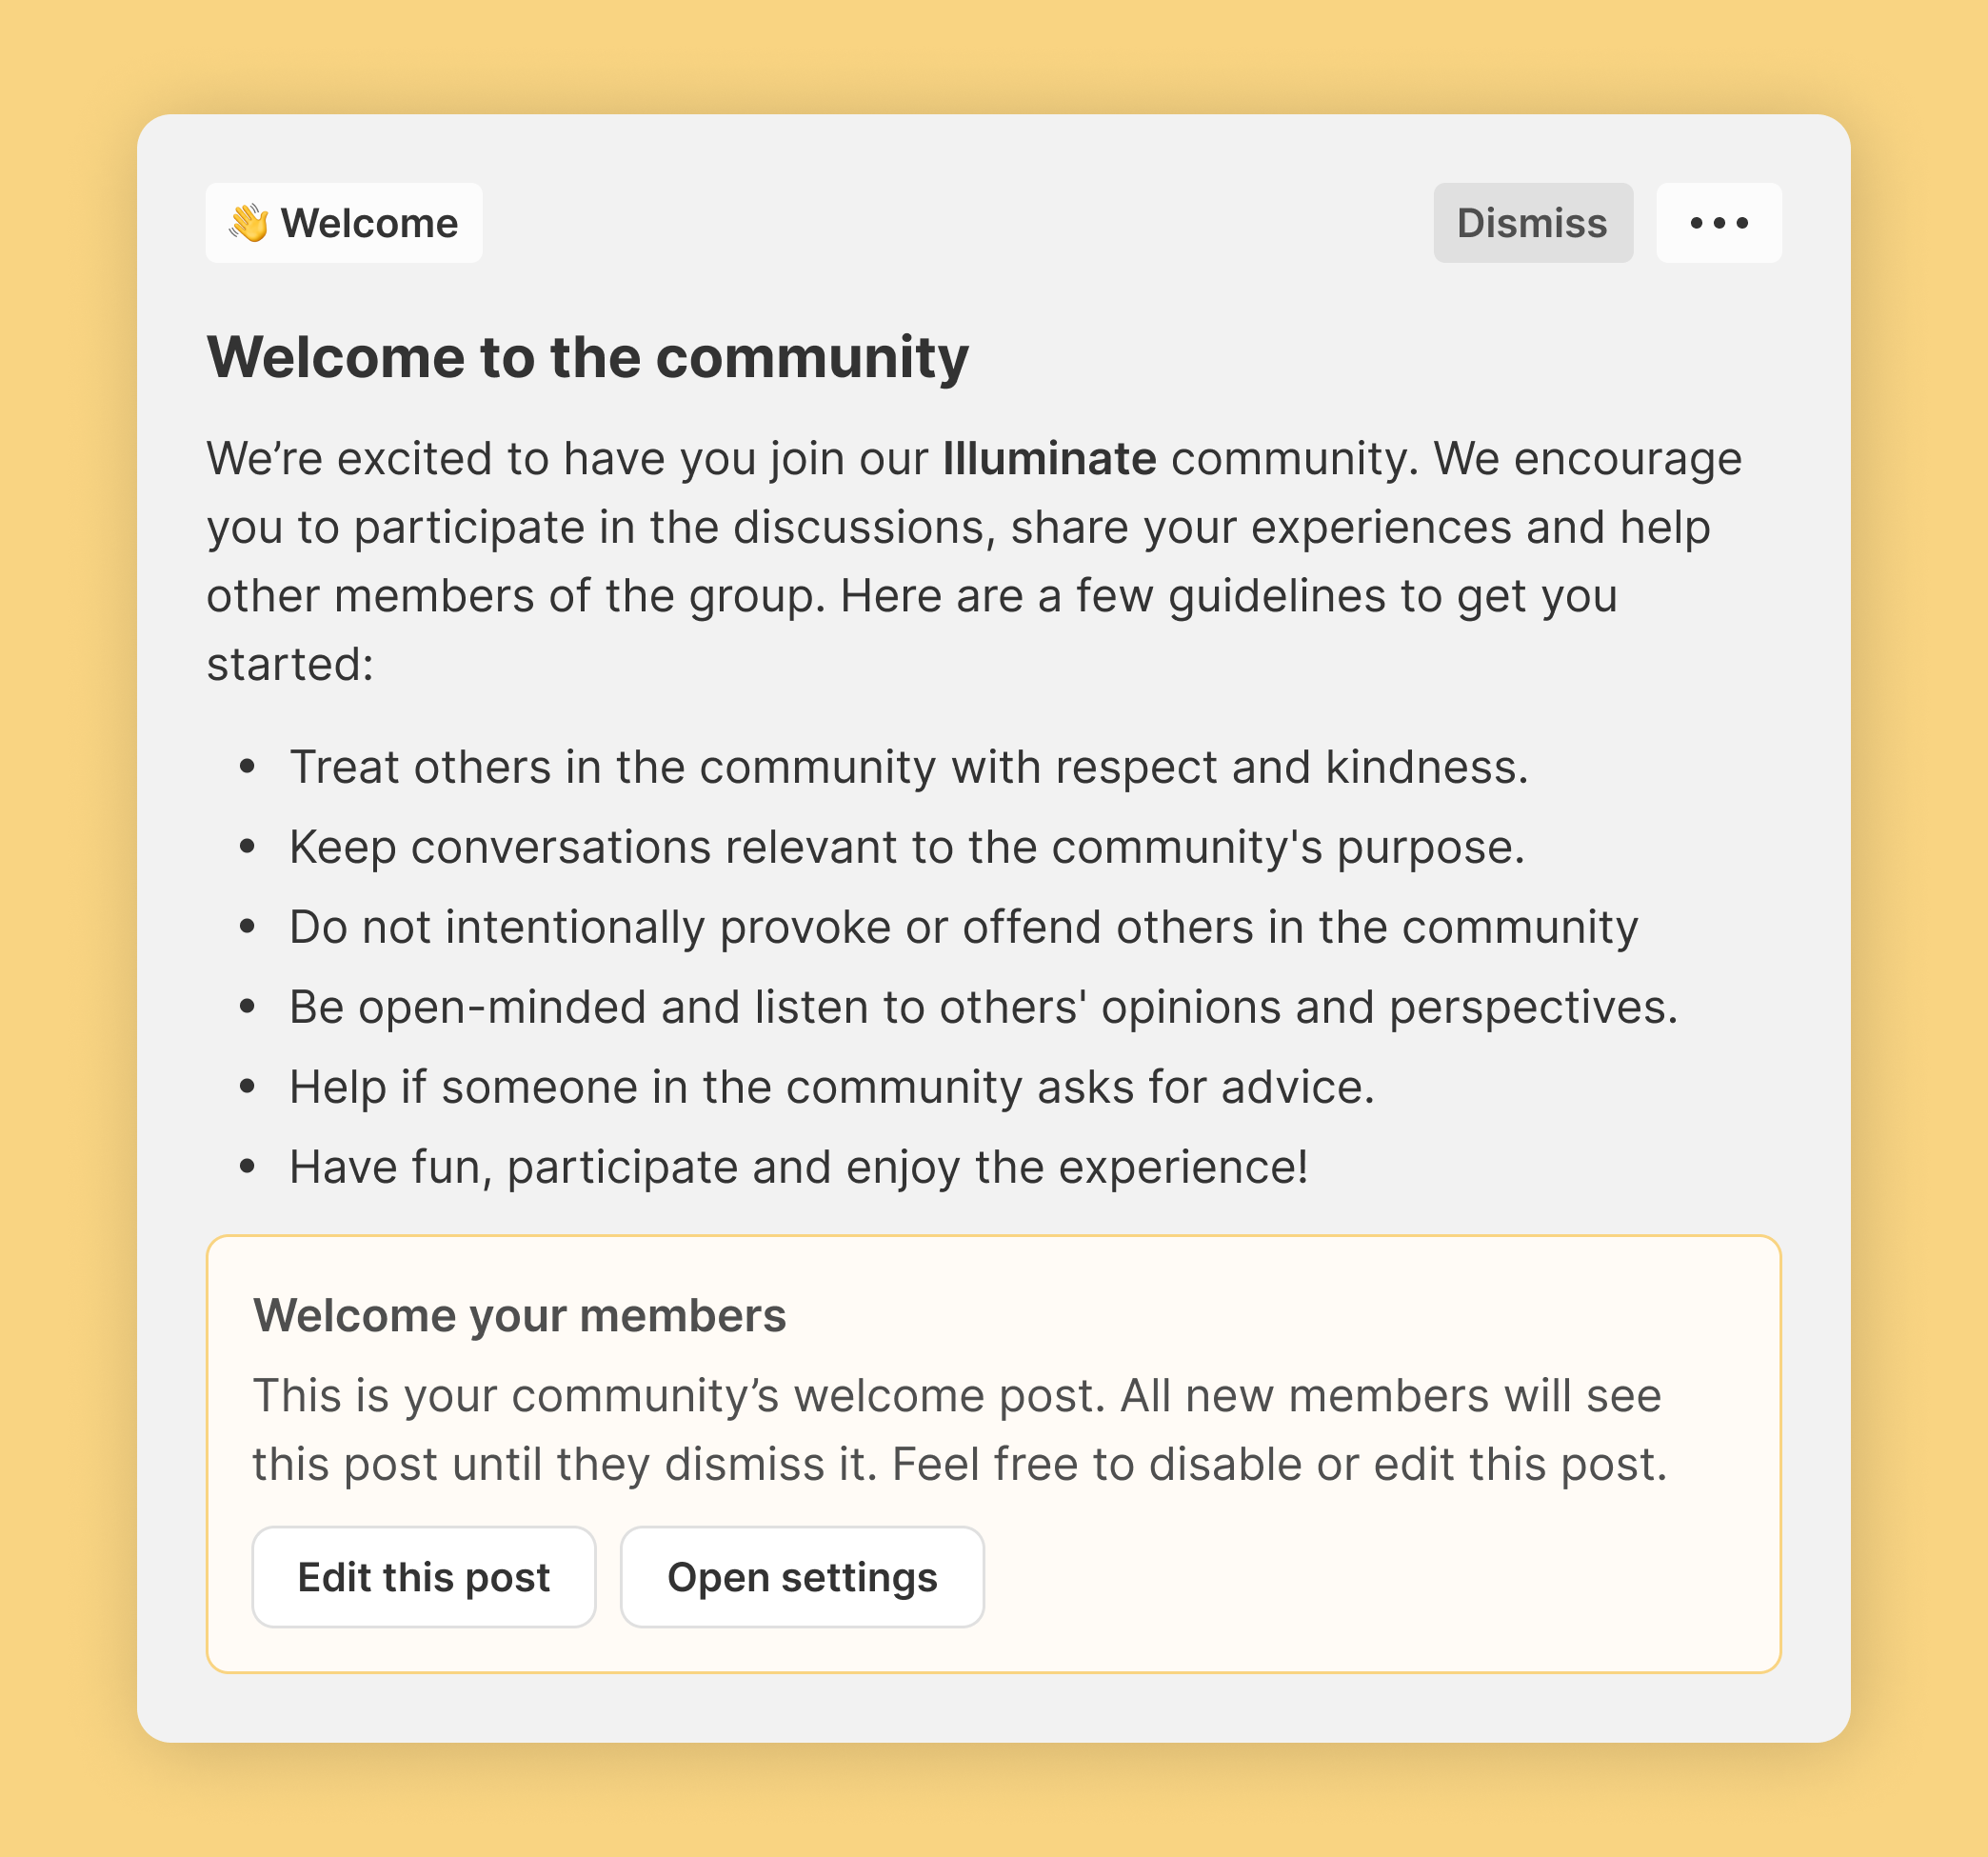 First impressions count: Our guide to community onboarding